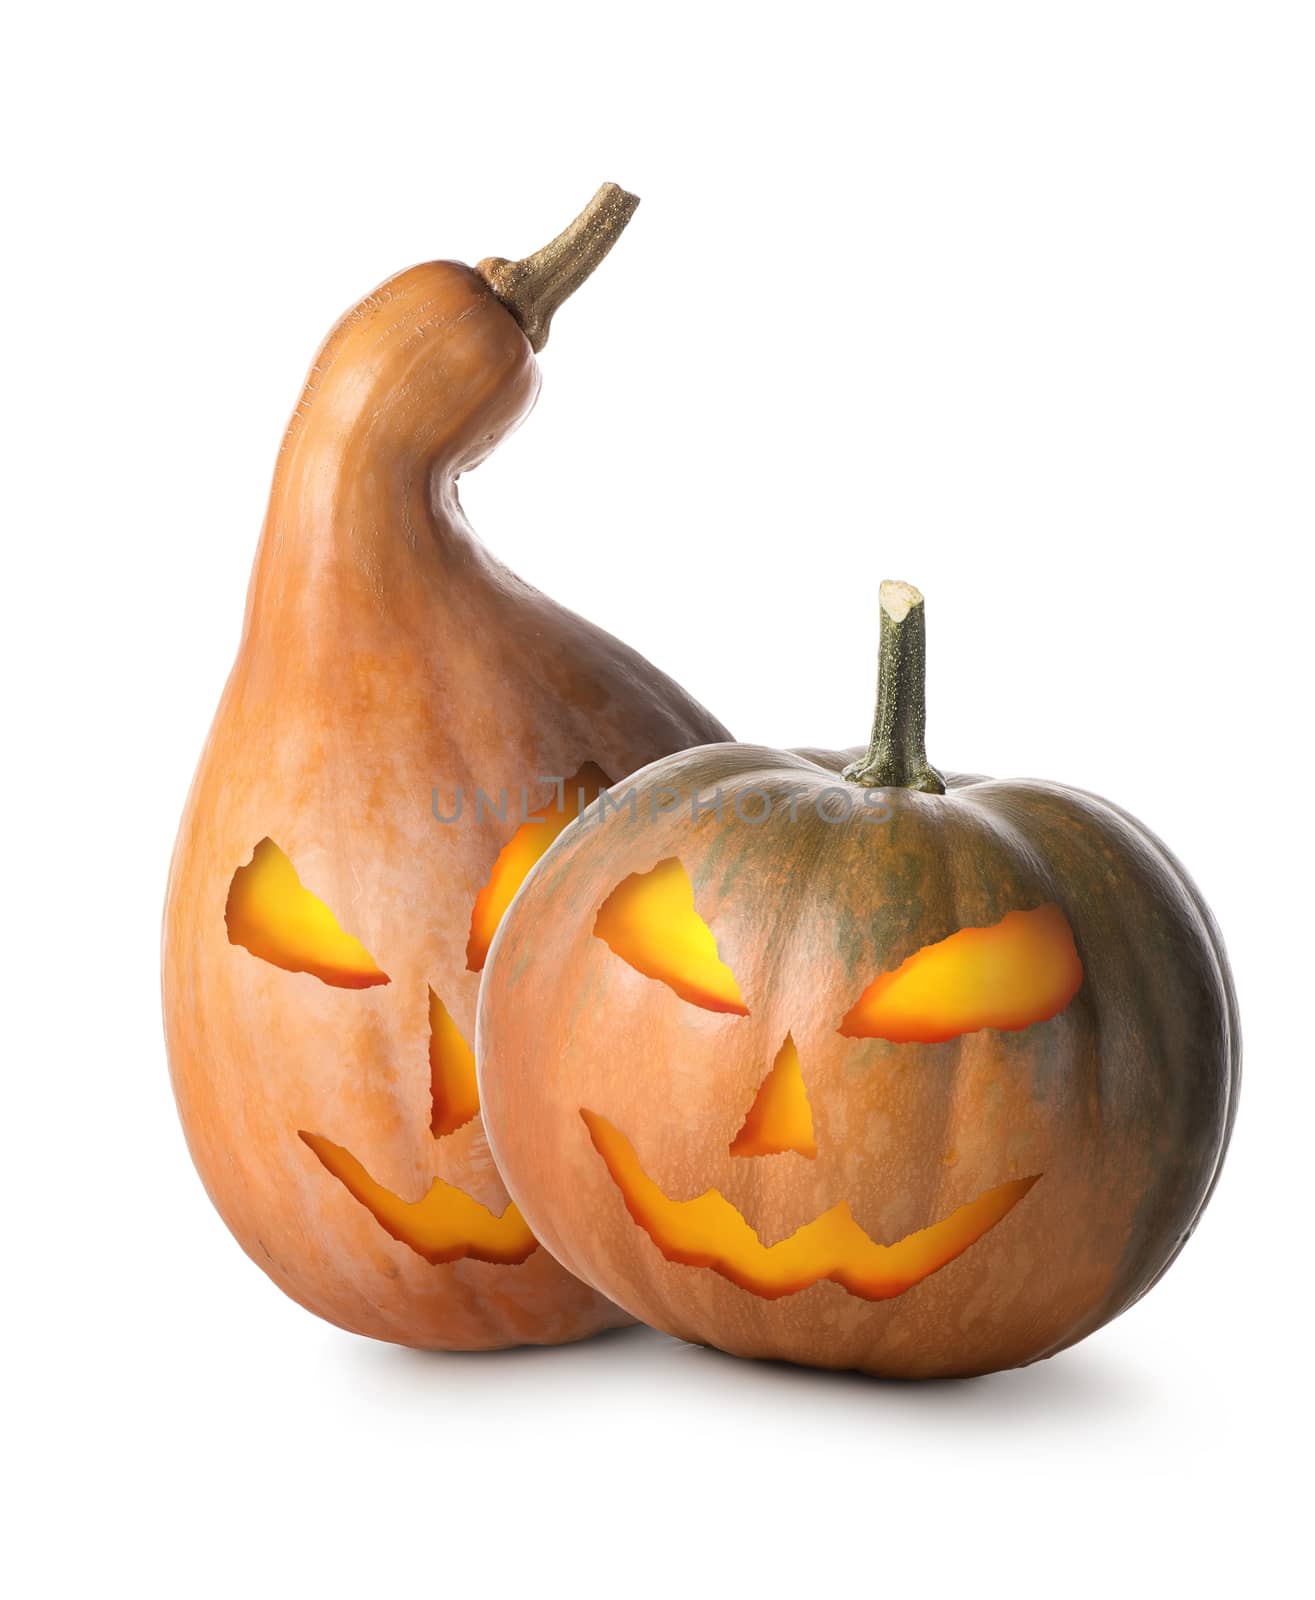 Halloween pumpkins isolated on a white background